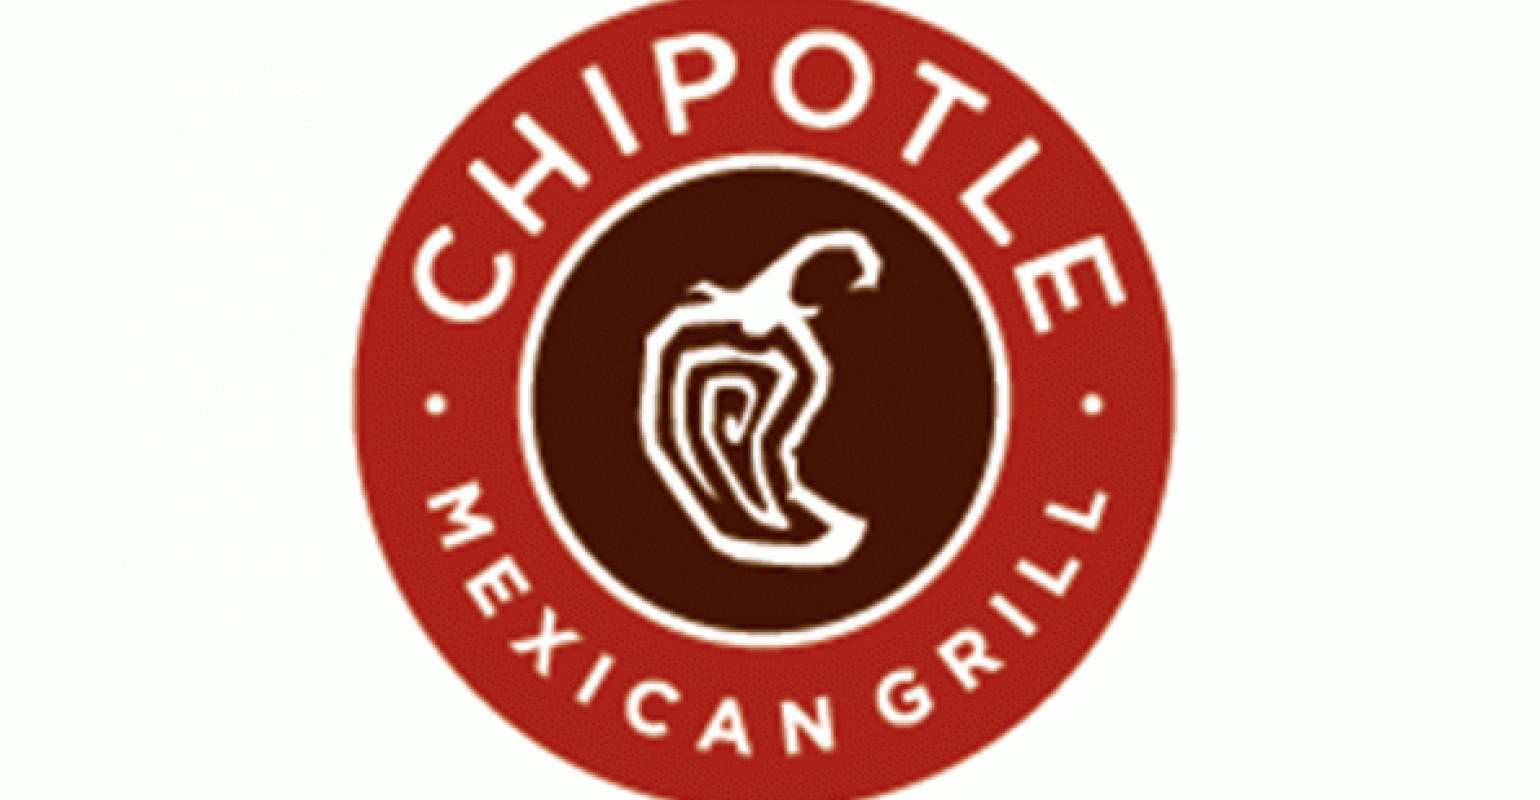 chipotle-ceo-vows-to-improve-customer-experience-nation-s-restaurant-news